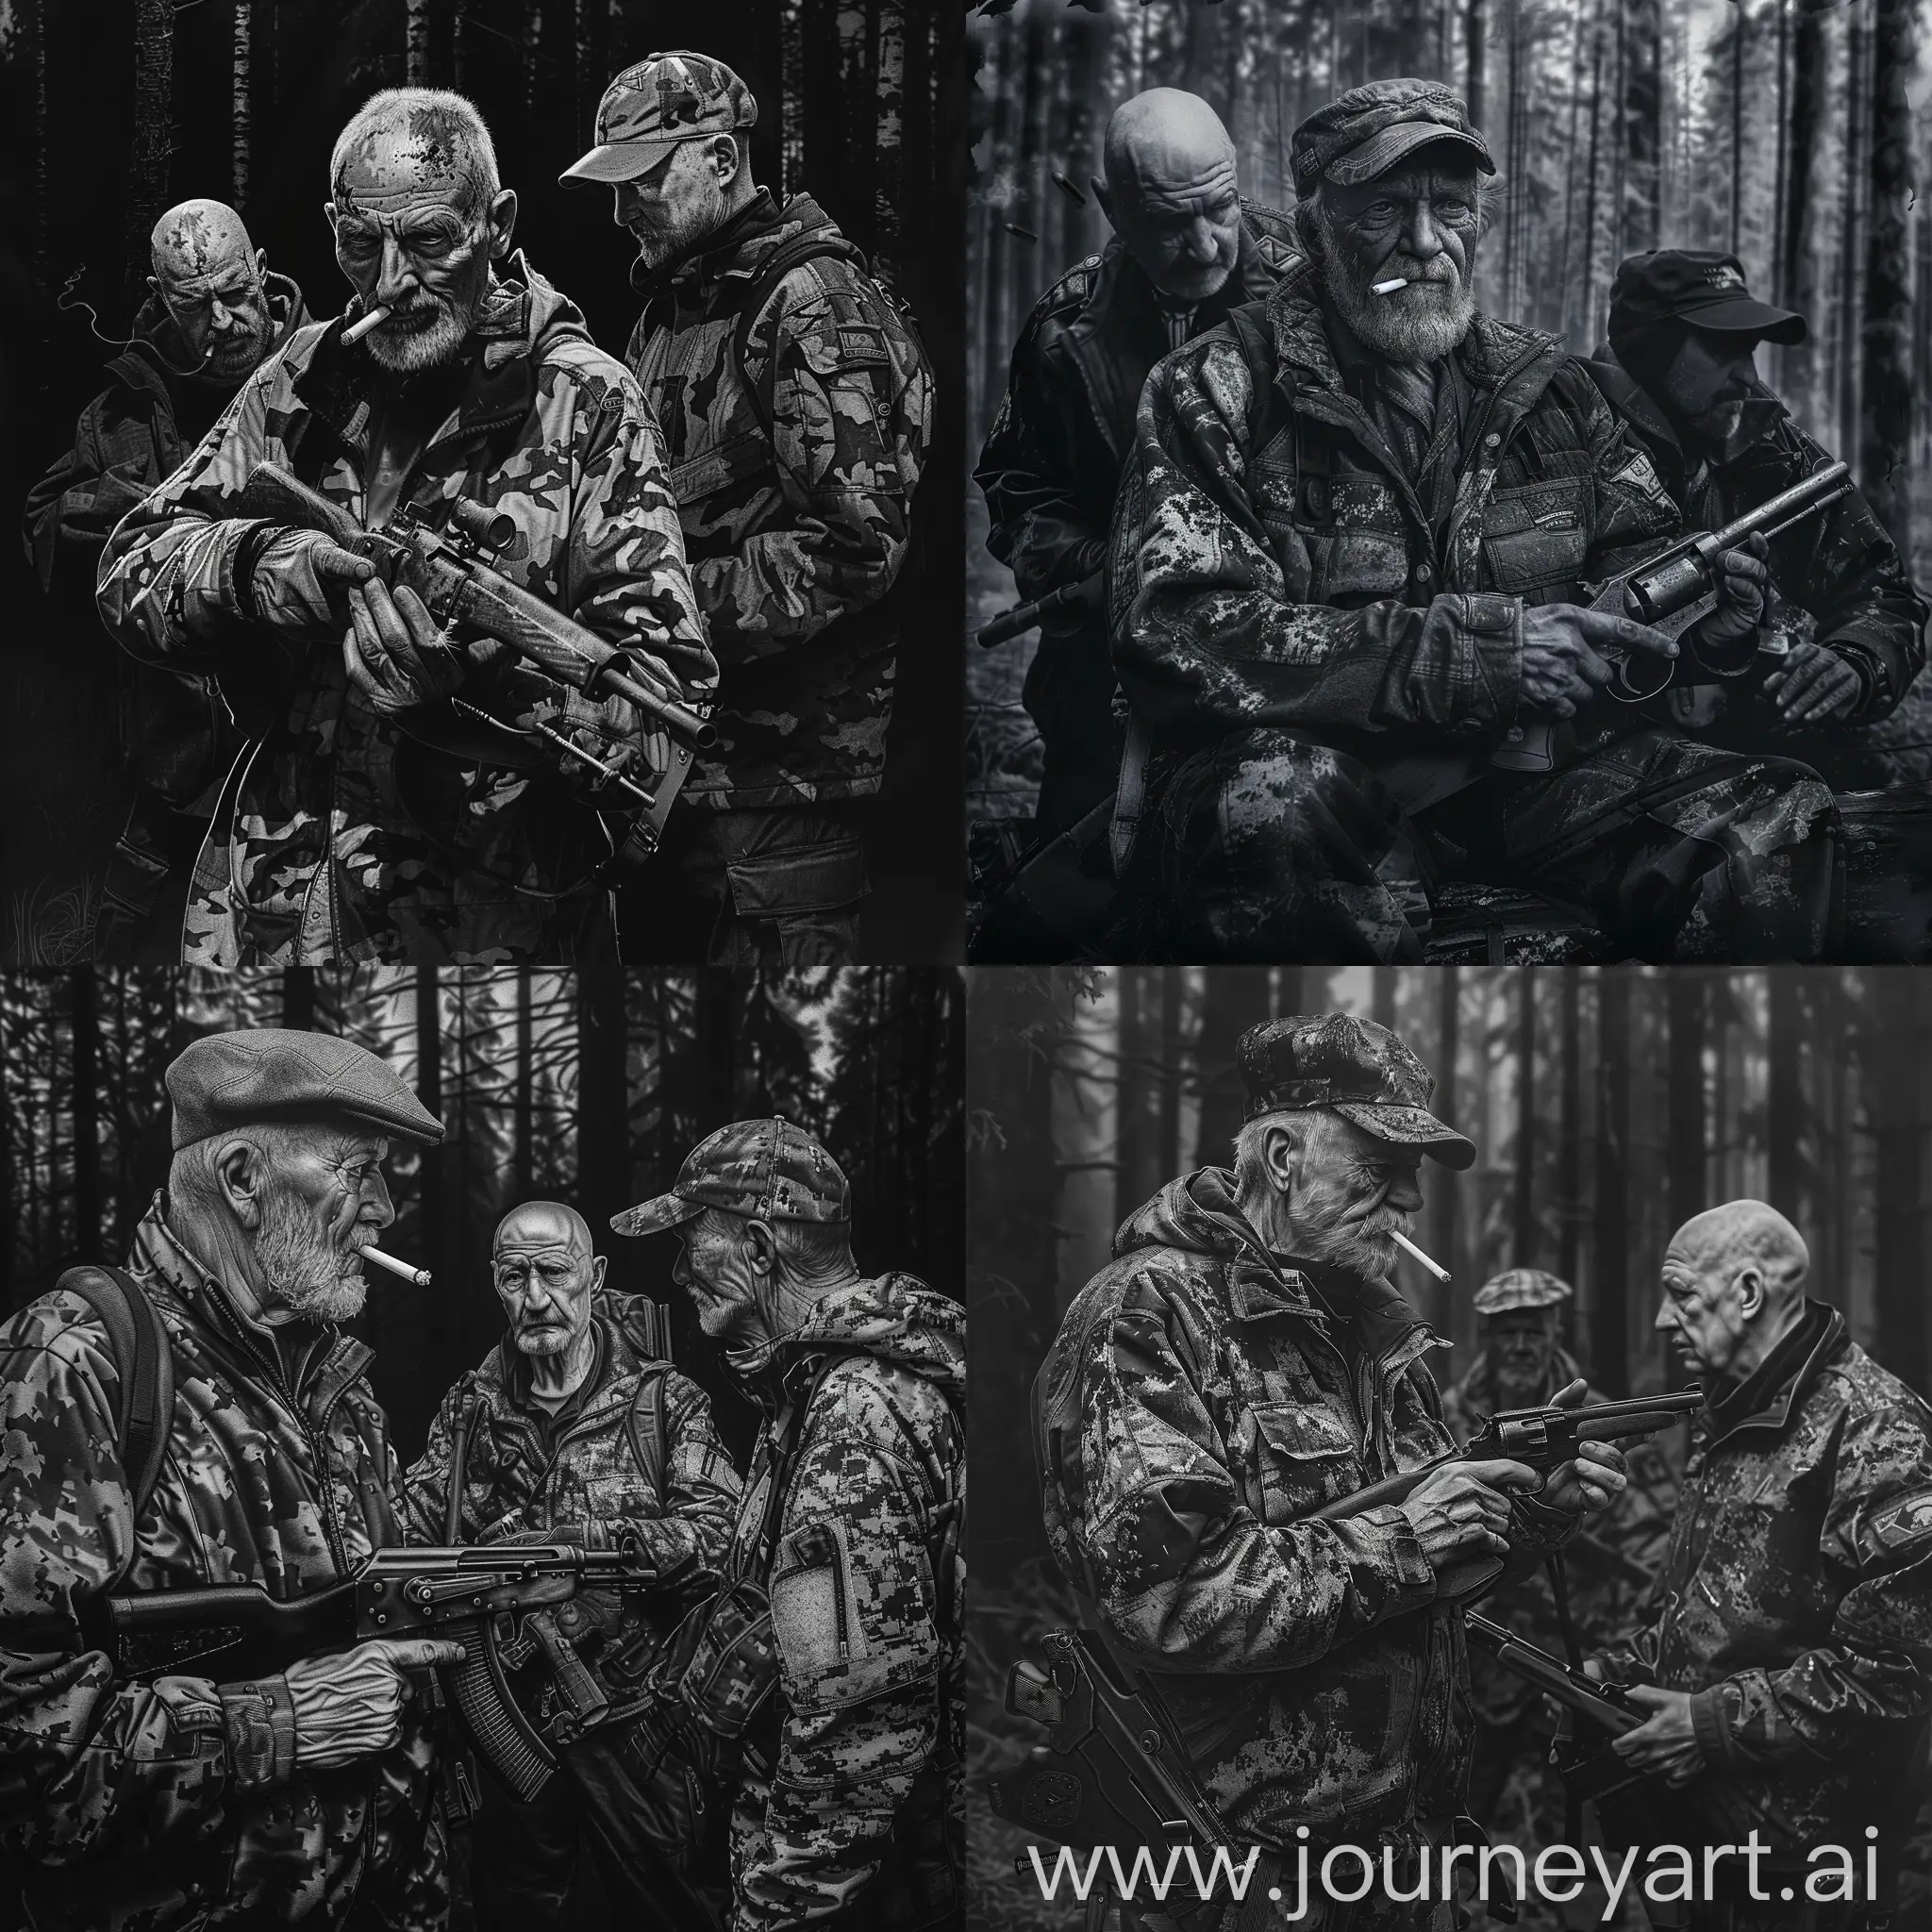 forest, taiga, three hunters, one hunter is an old man, a cigarette in his teeth, an old gun in his hands, an old camouflage jacket, a hat, a gray beard, another man is dressed in a camouflage jacket and dark pants, a bald head, an old gun in his hand, a third man in a cap, a camouflage dark jacket, an old gun in his hands, forest, taiga, gloomy atmosphere, black and white art, drawing, ultra detail, 8K image quality,  Dark Fantasy Style